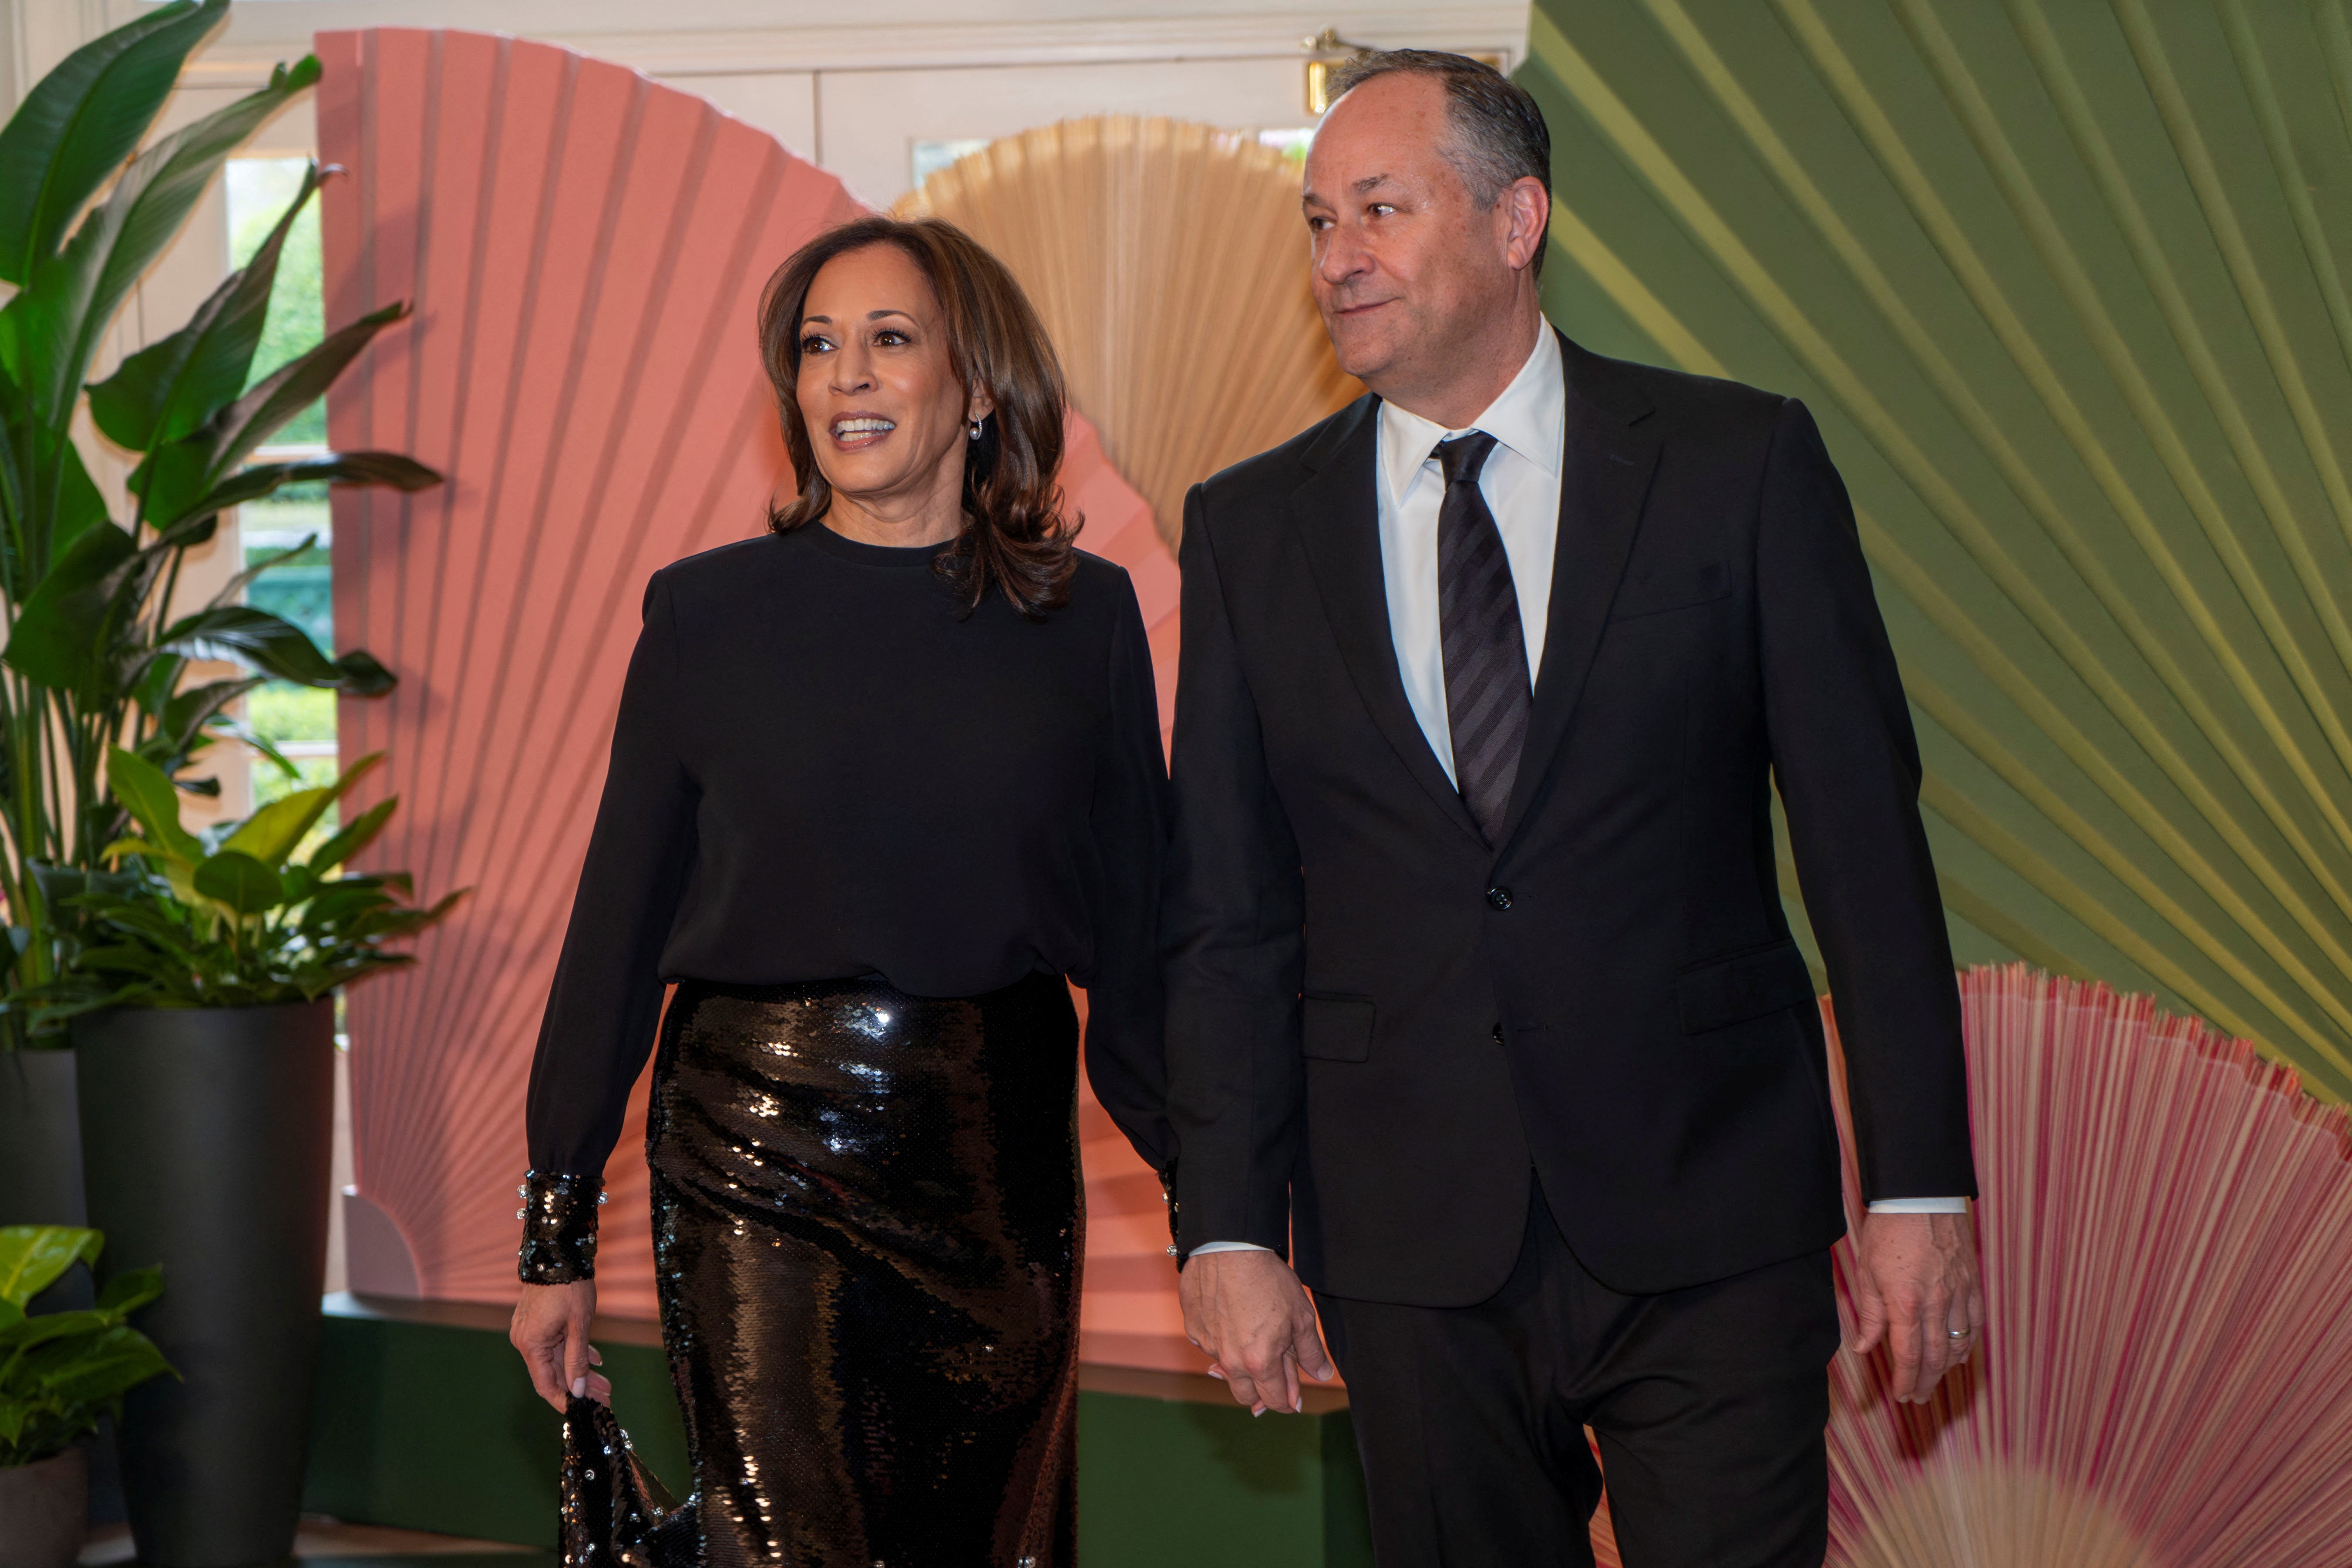 Harris and her husband, second gentleman Doug Emhoff, arrive for a state dinner earlier this year